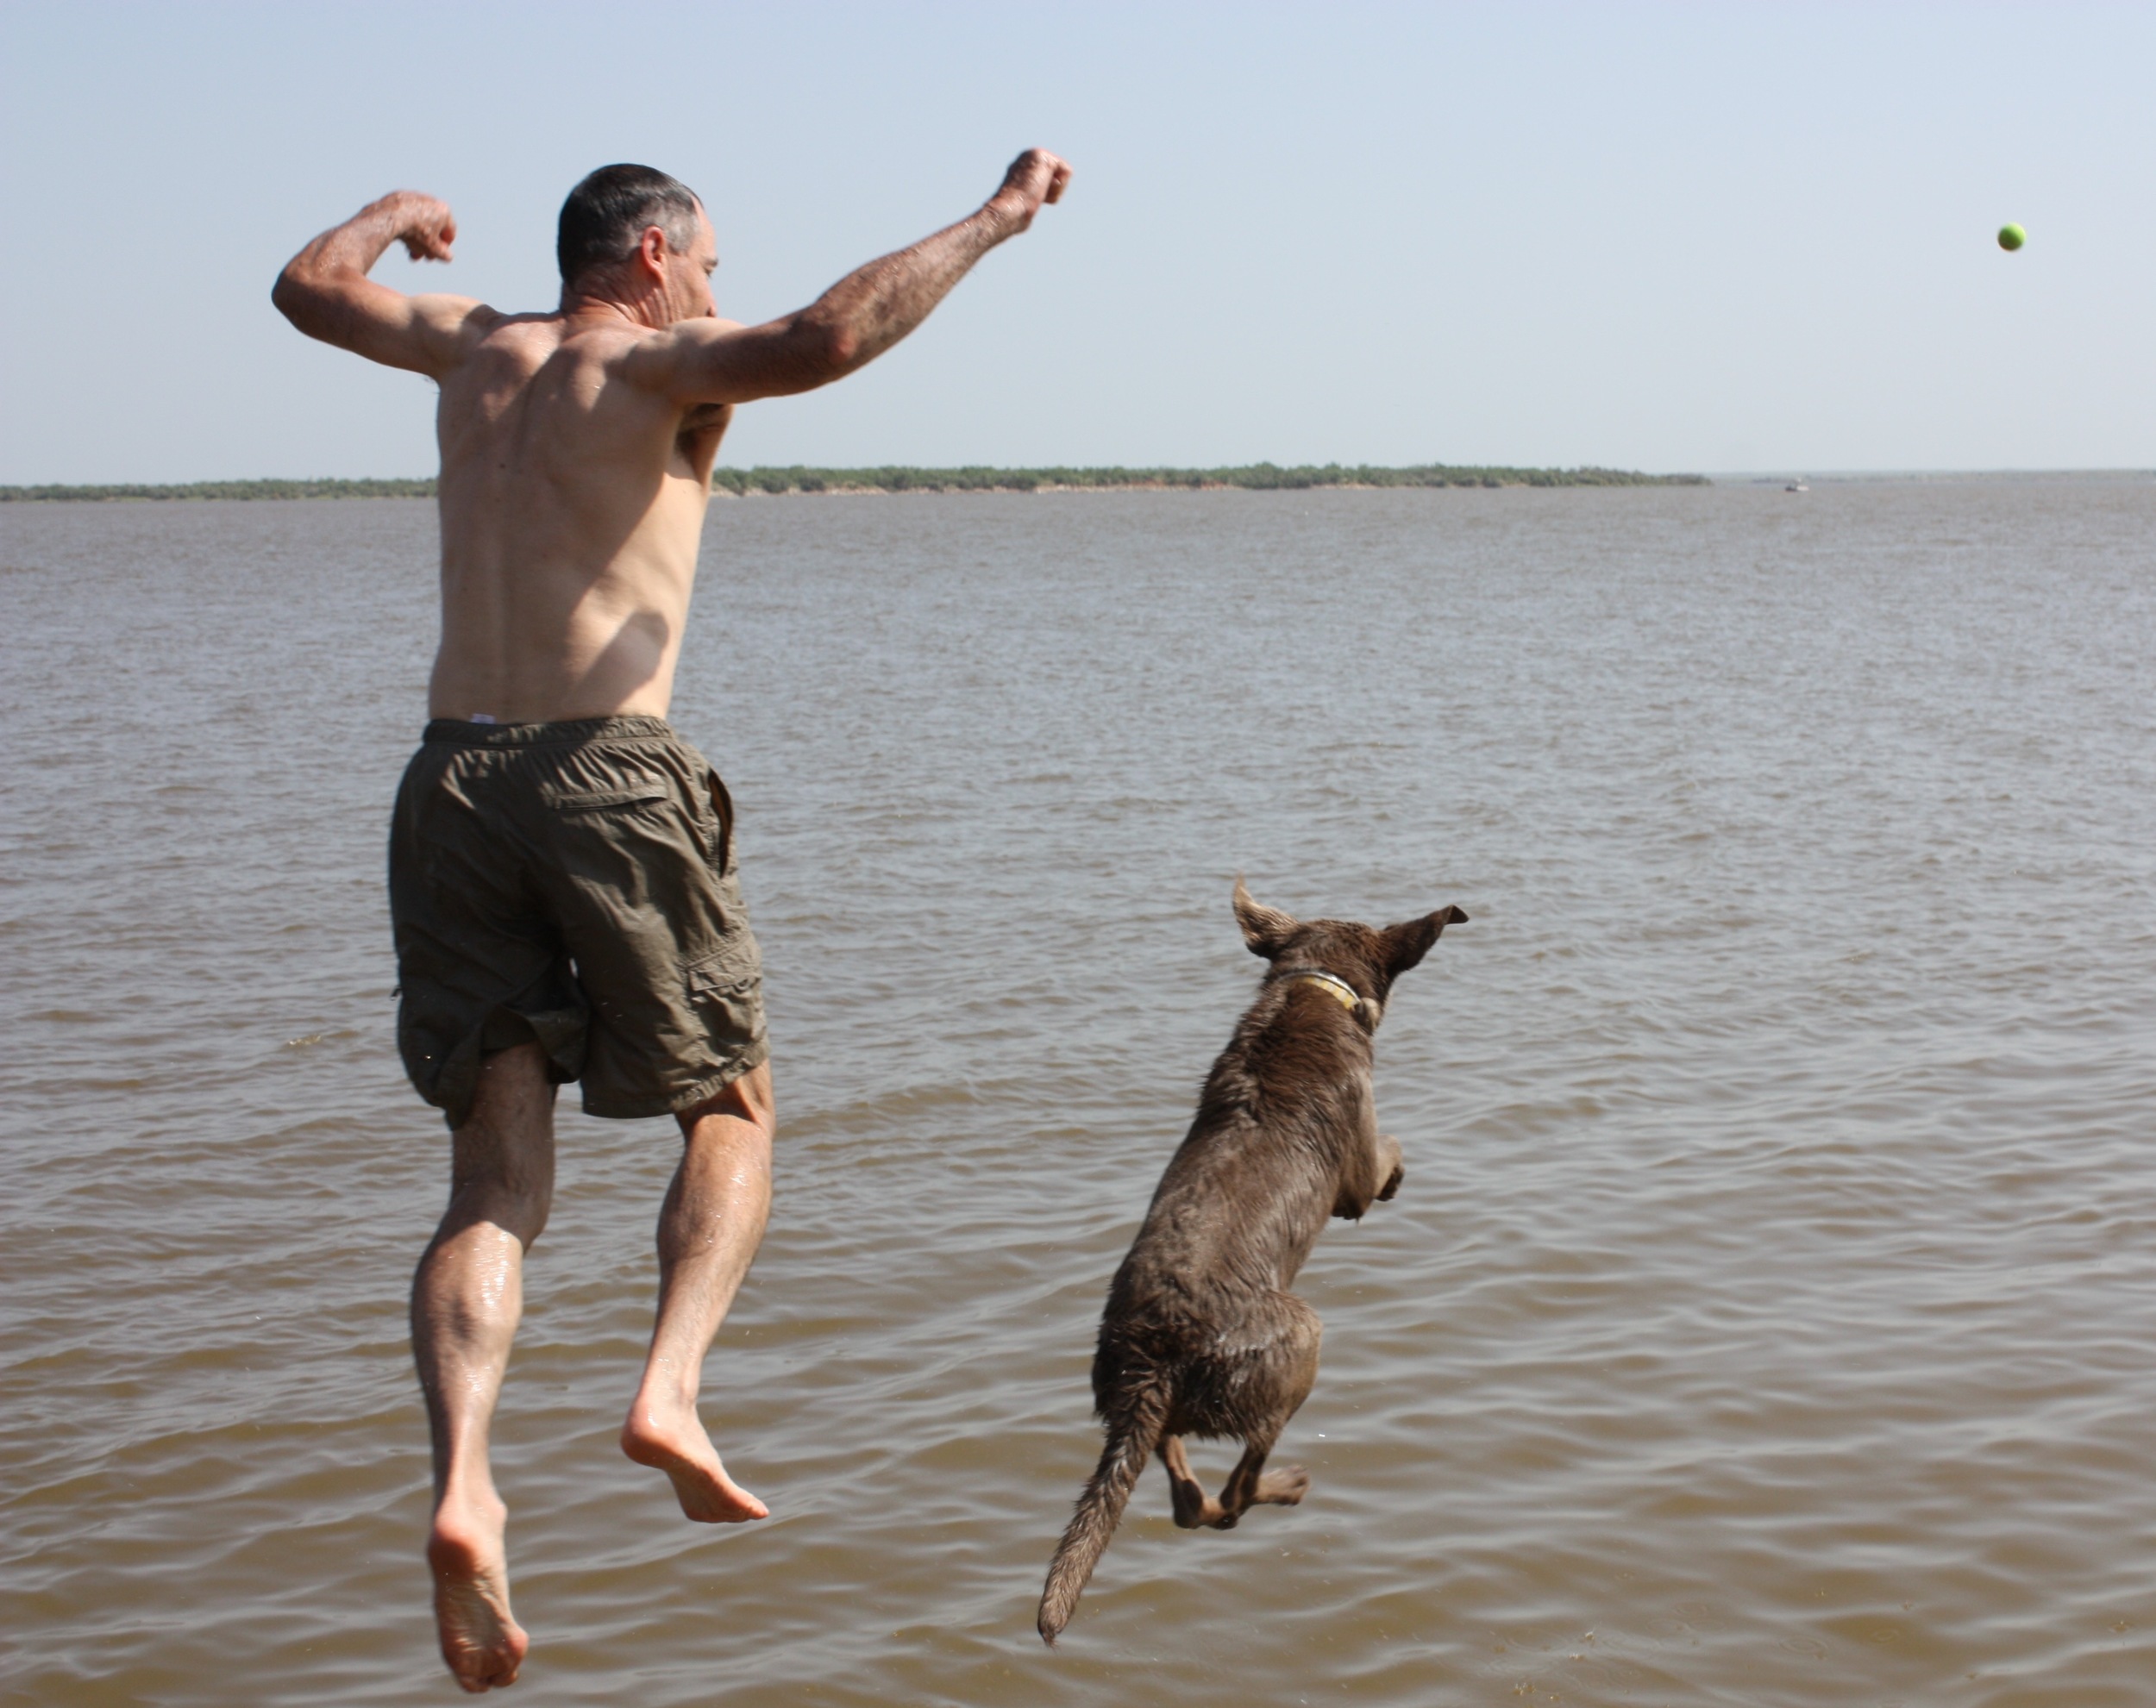  Lake Kemp in July - Jumping with Joy! 